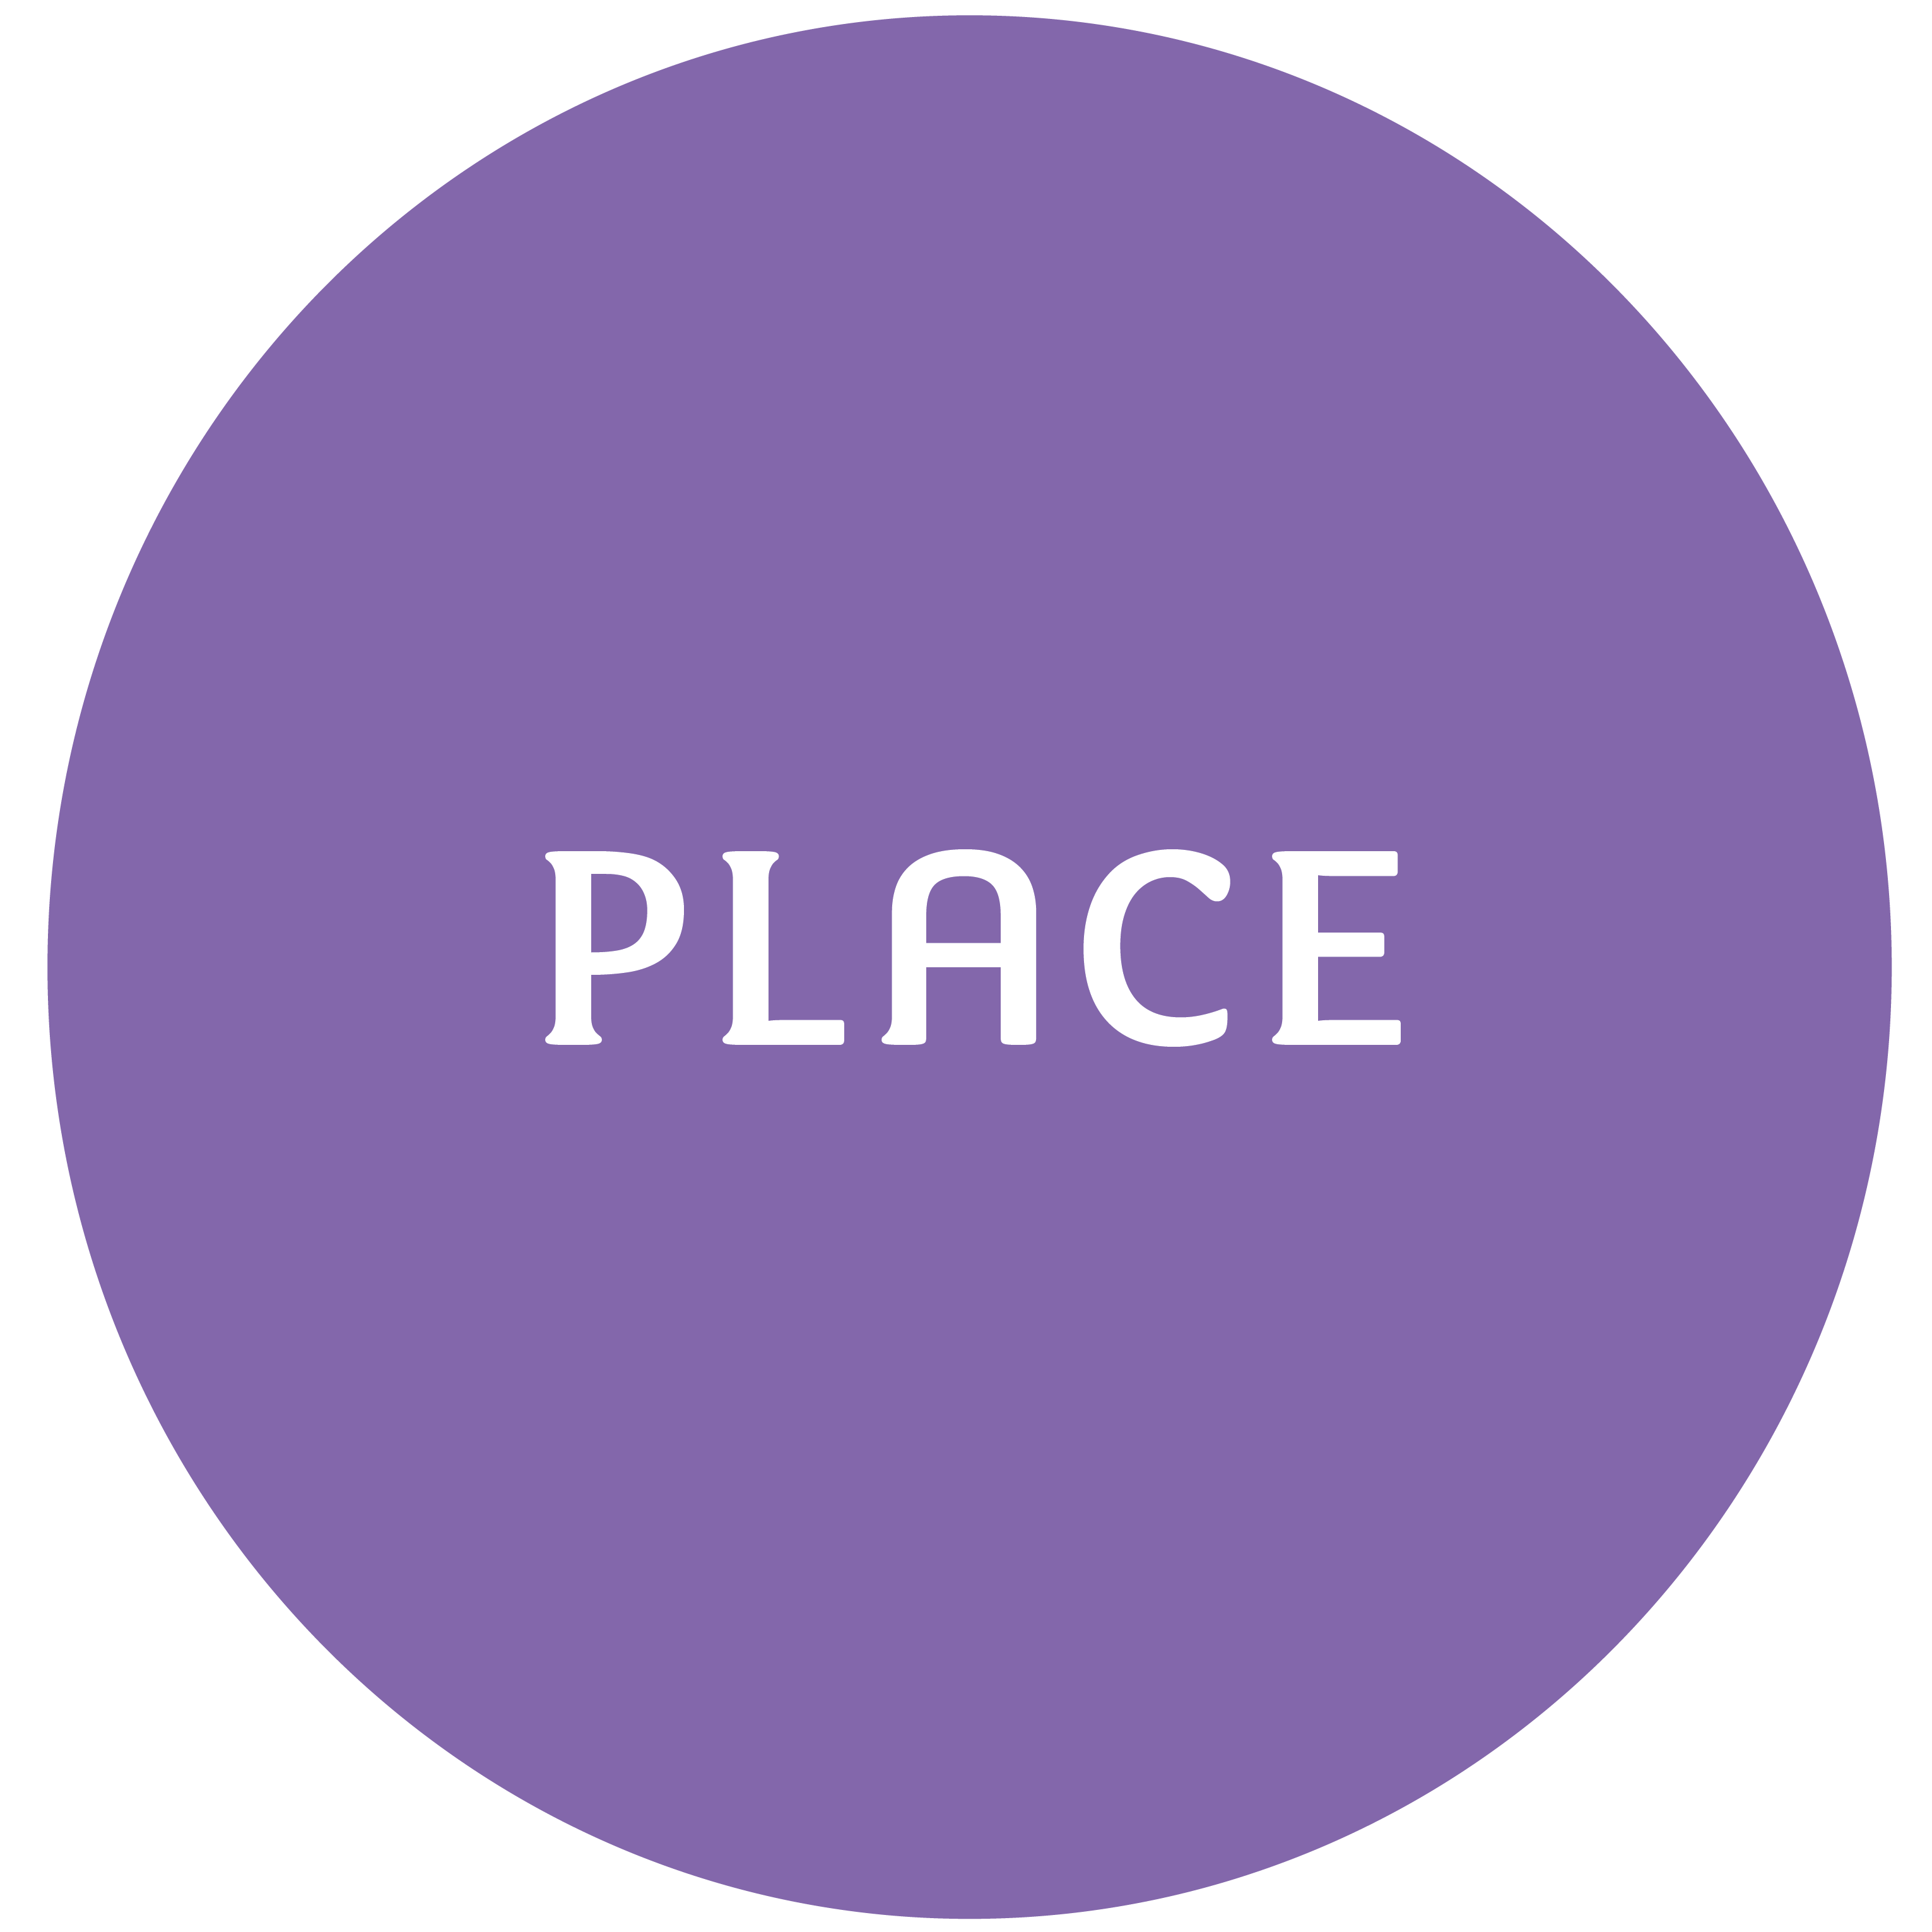 Our shared vision: place